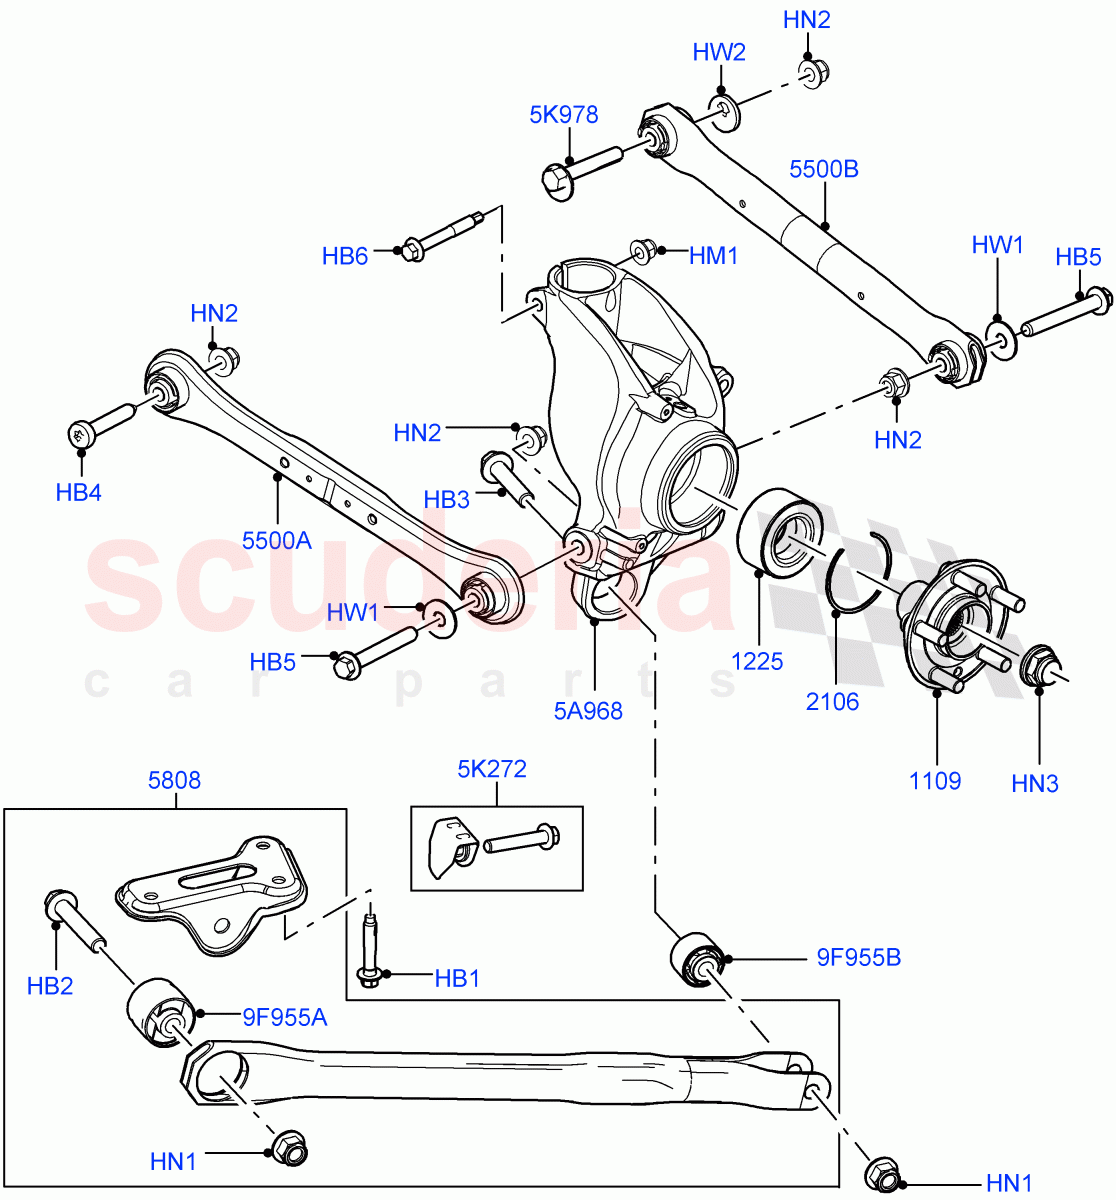 Rear Knuckle And Suspension Arms(Itatiaia (Brazil))((V)FROMGT000001) of Land Rover Land Rover Range Rover Evoque (2012-2018) [2.2 Single Turbo Diesel]